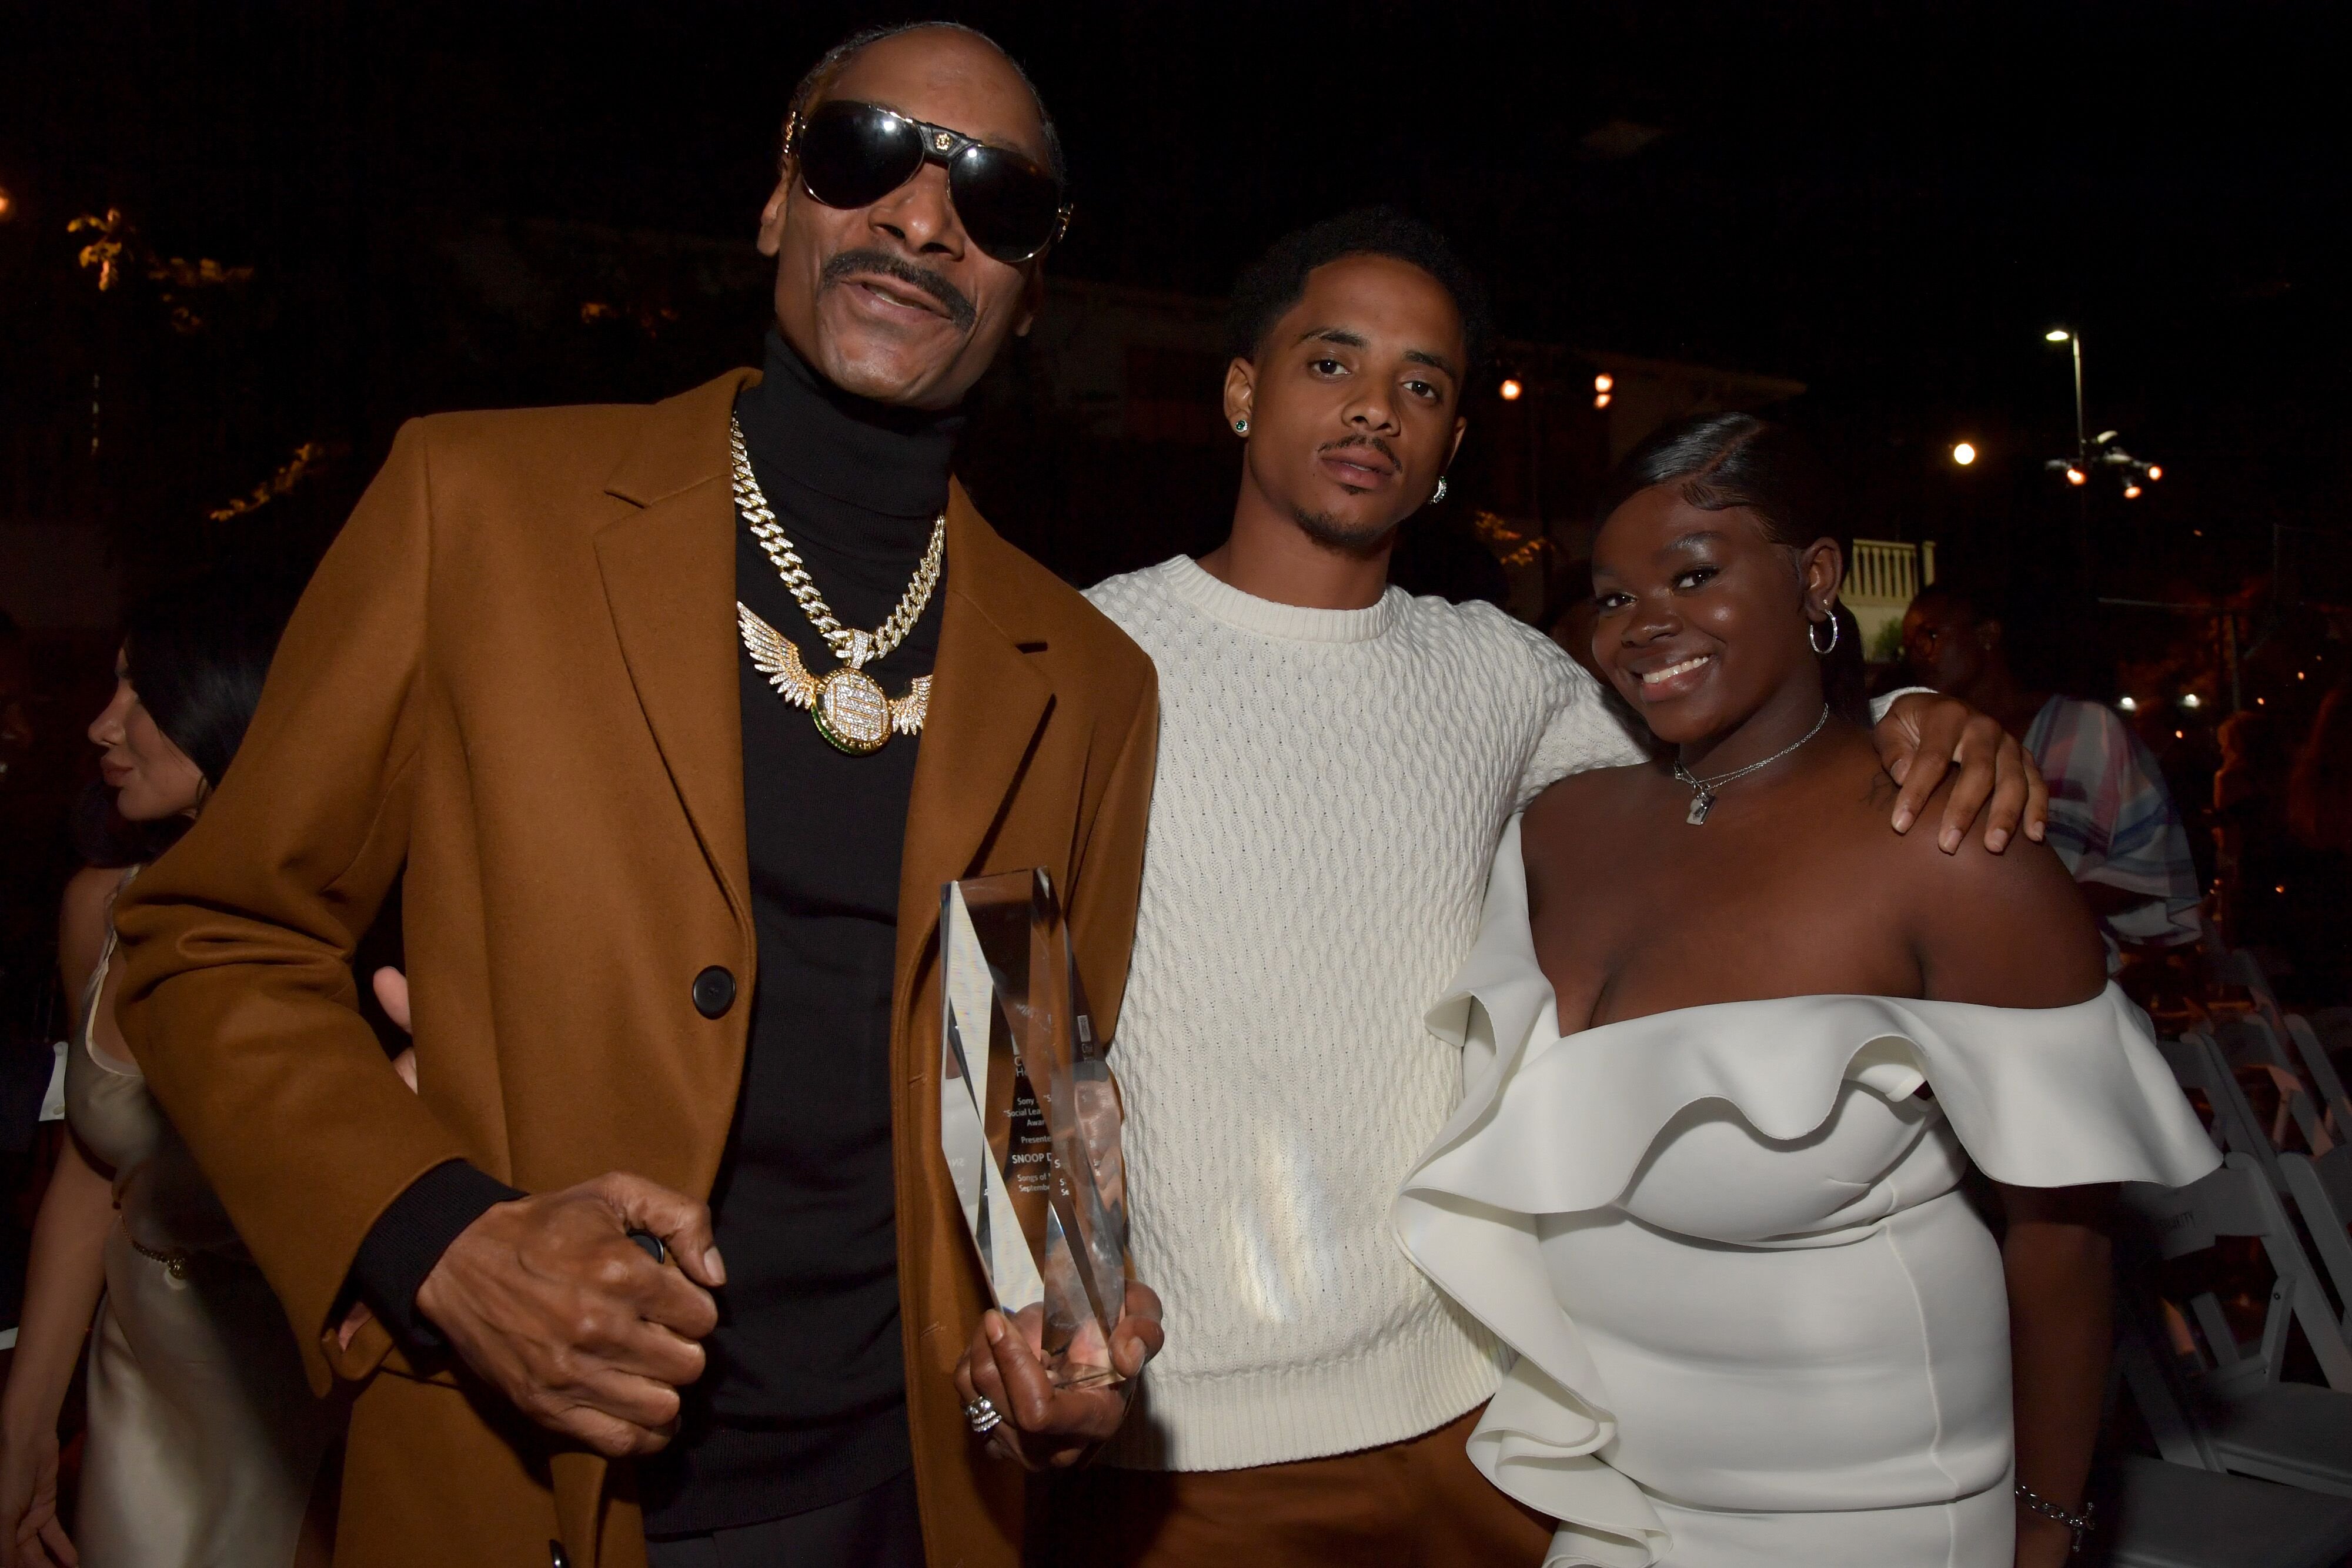 Snoop Dogg and his children attend a red carpet event together | Source: Getty Images